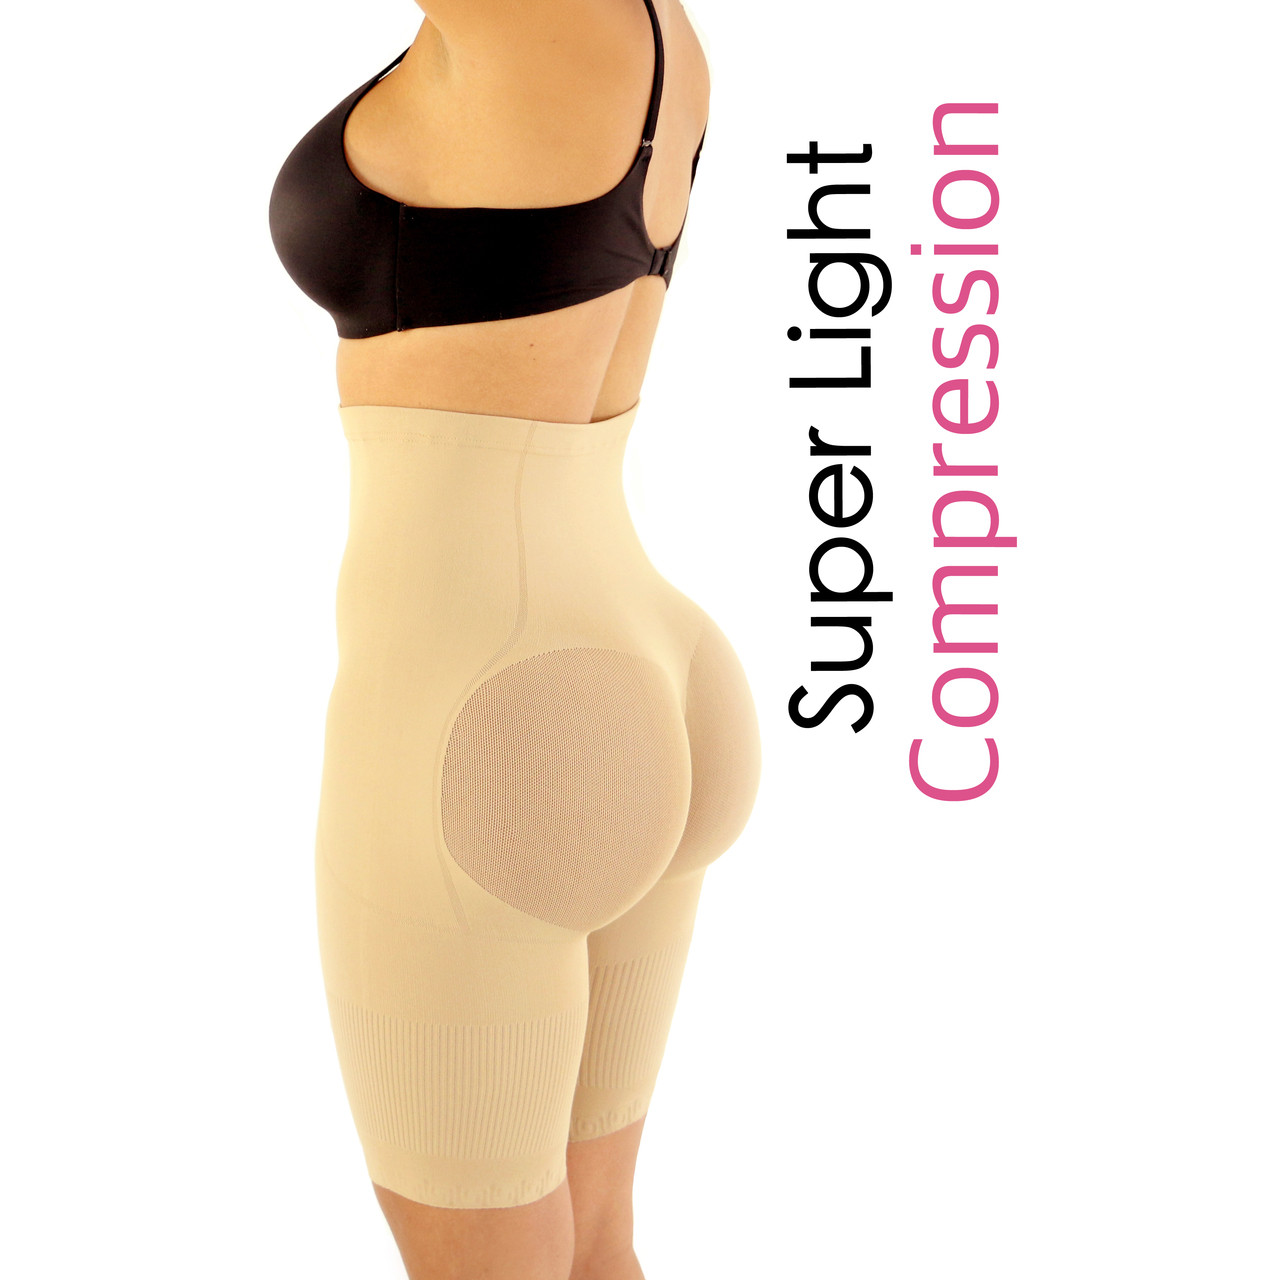 Yahaira makes some of my favorite shapewear because it seamlessly